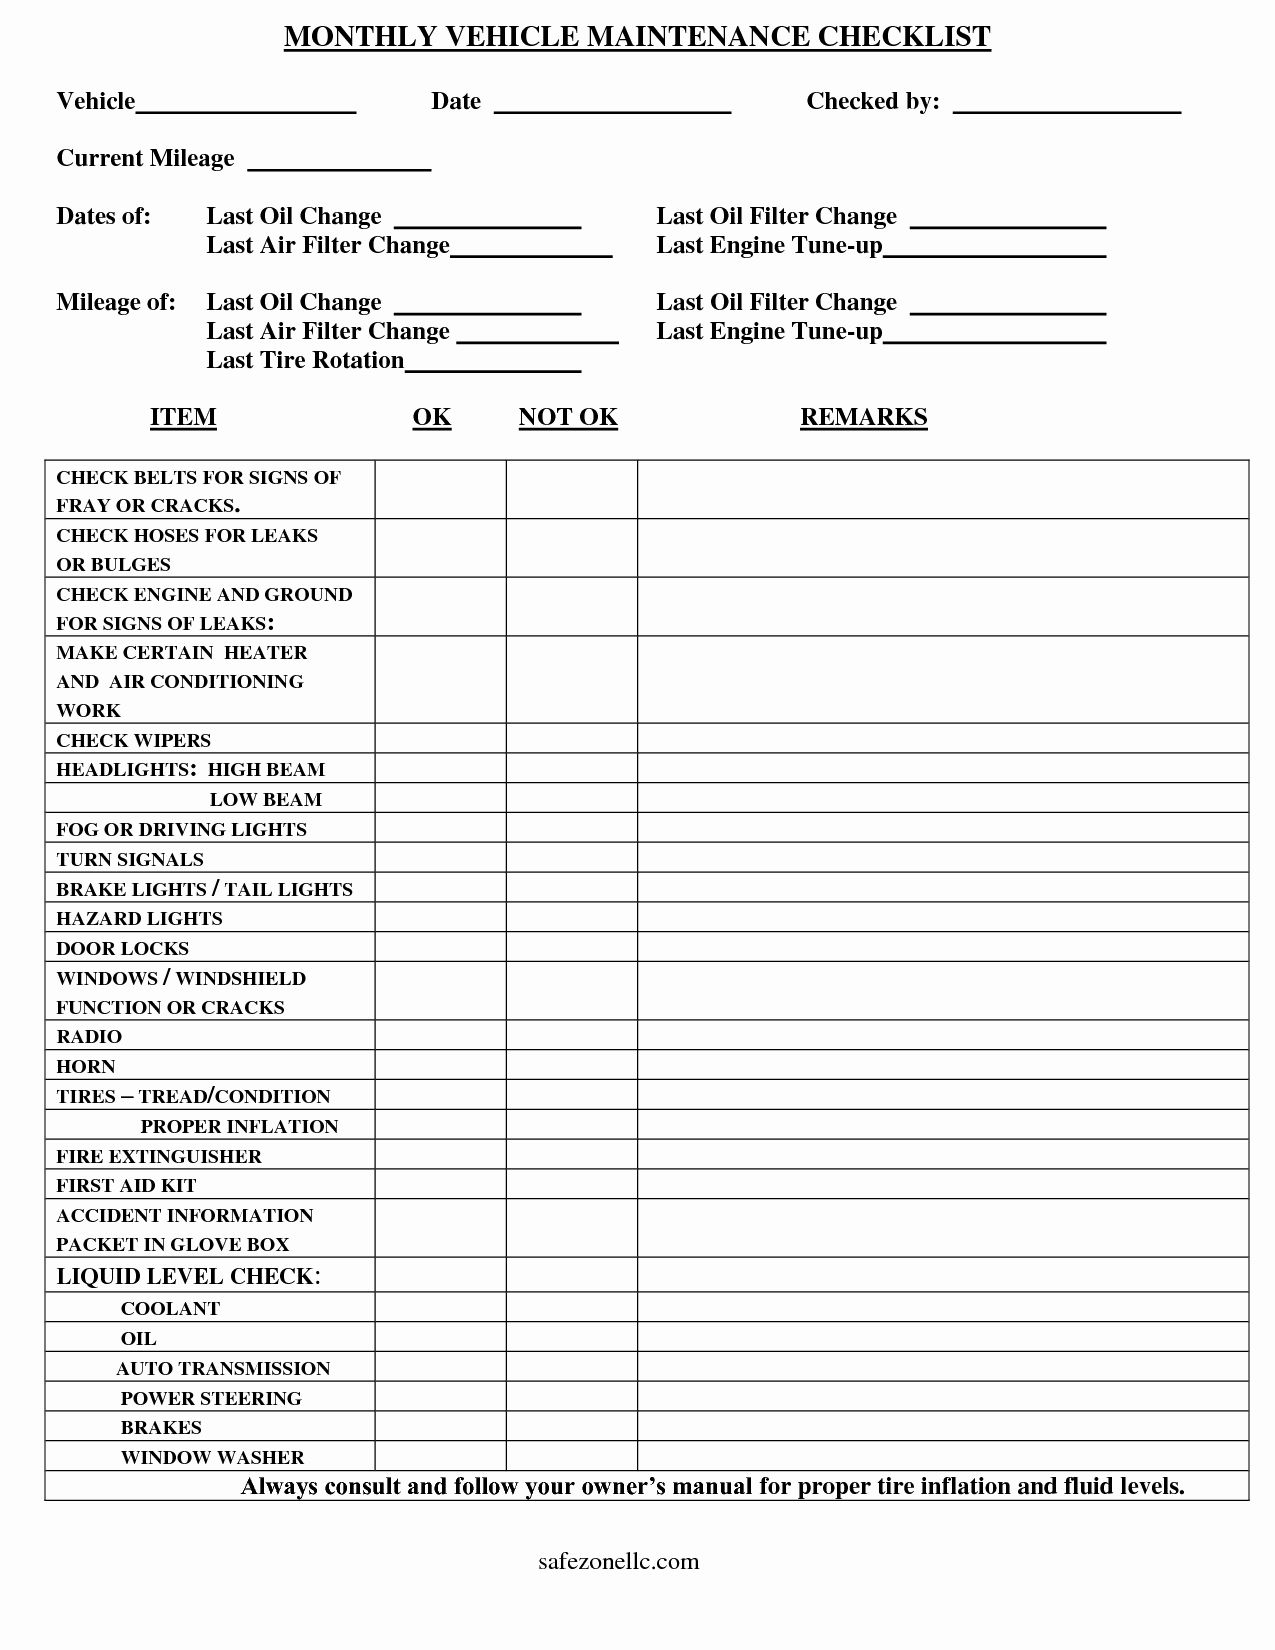 10 Car Maintenance Schedule Intended For Auto Service Checklist Template Intended For Auto Service Checklist Template